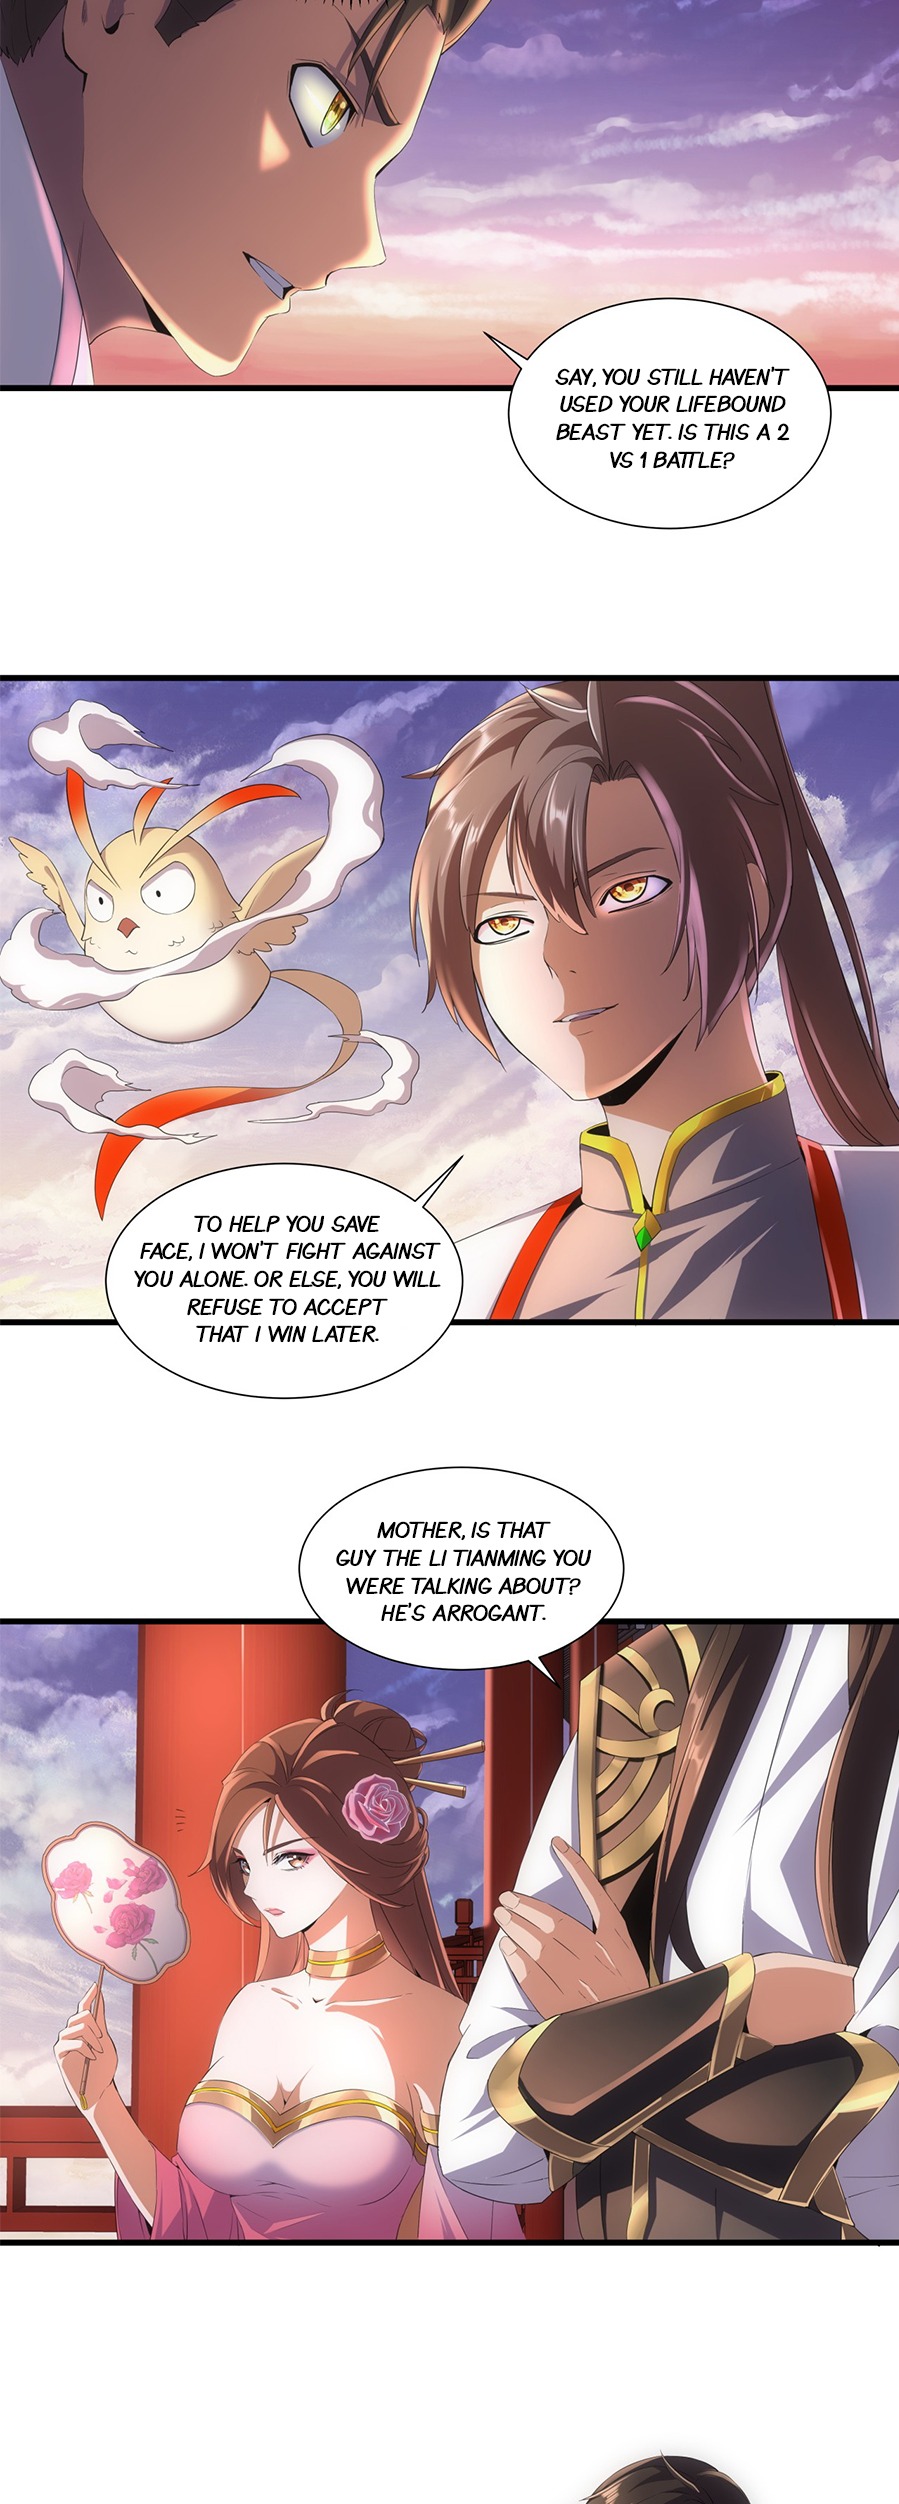 Eternal First God - Page 3